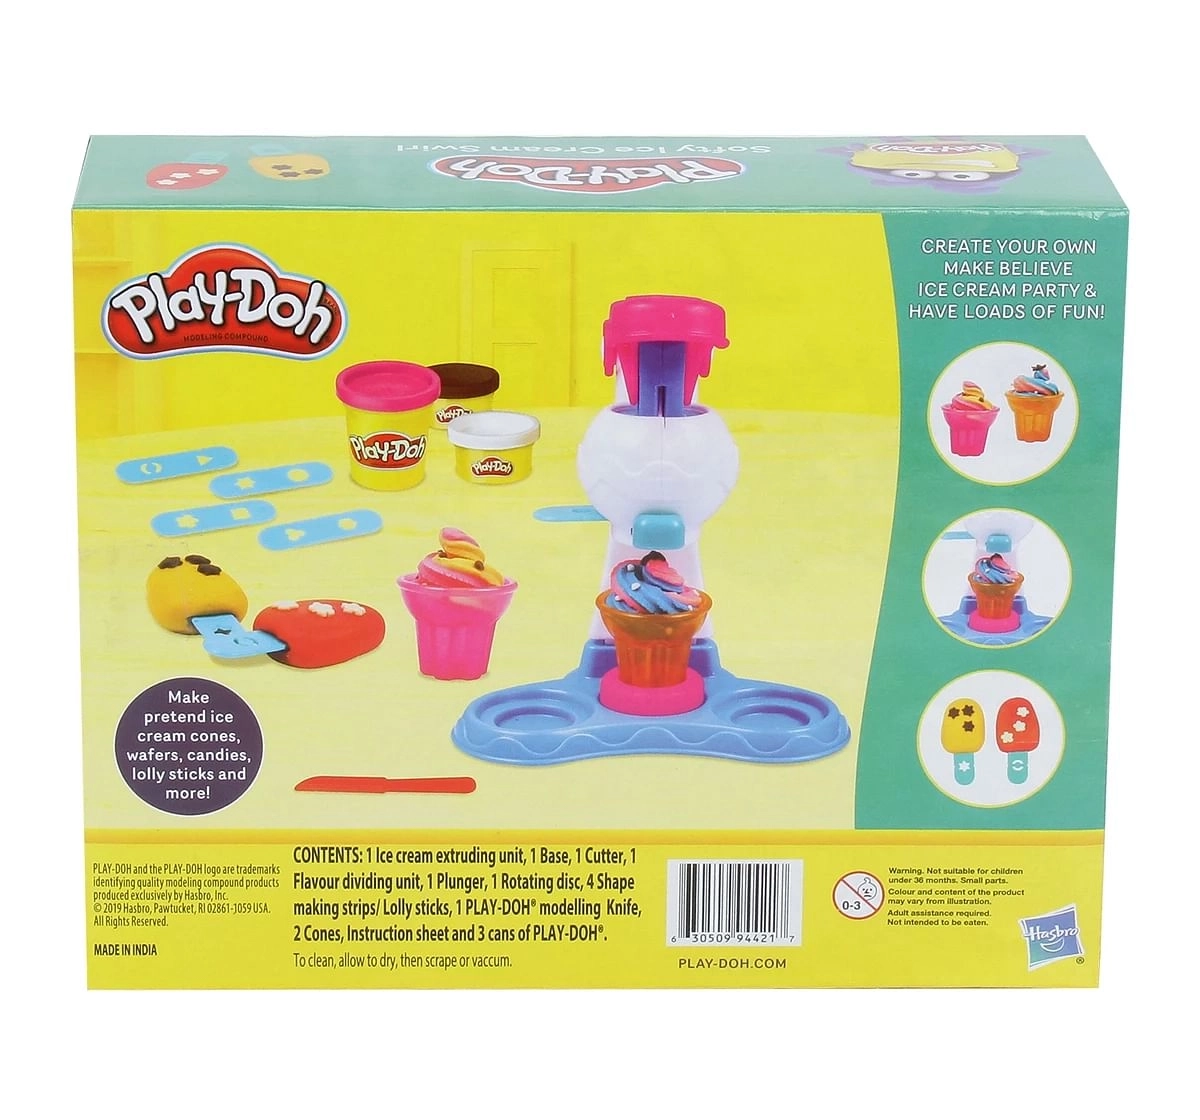 Unisex Plastic Click And Play, Child Age Group: 0-3 Yrs